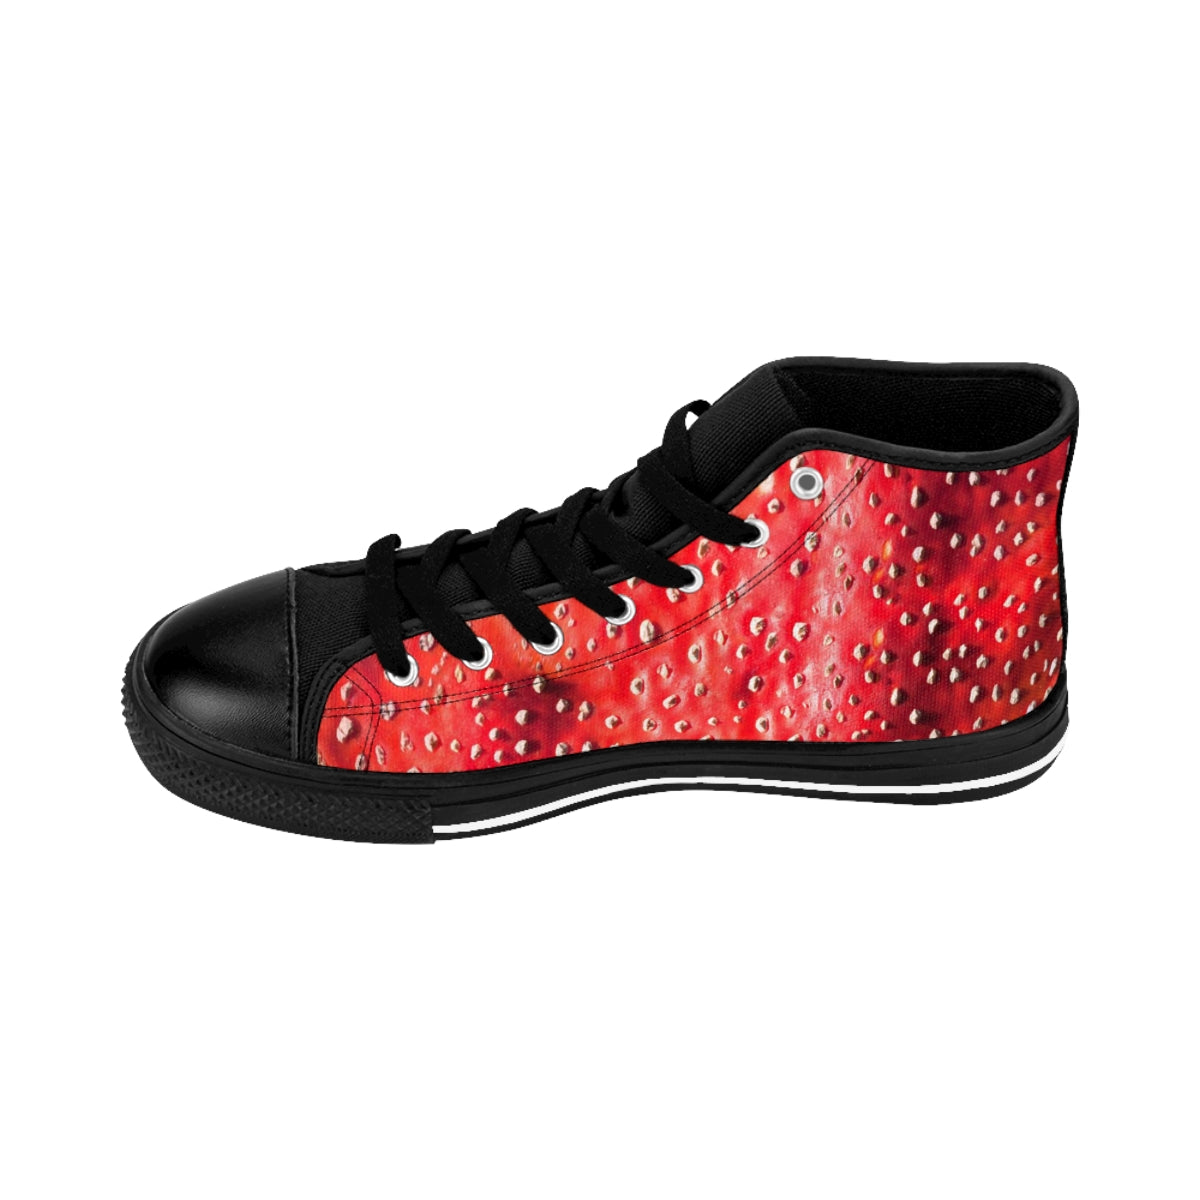 Fly Agaric All-over shoes | Hippie Raver High Top Canvas Sneakers